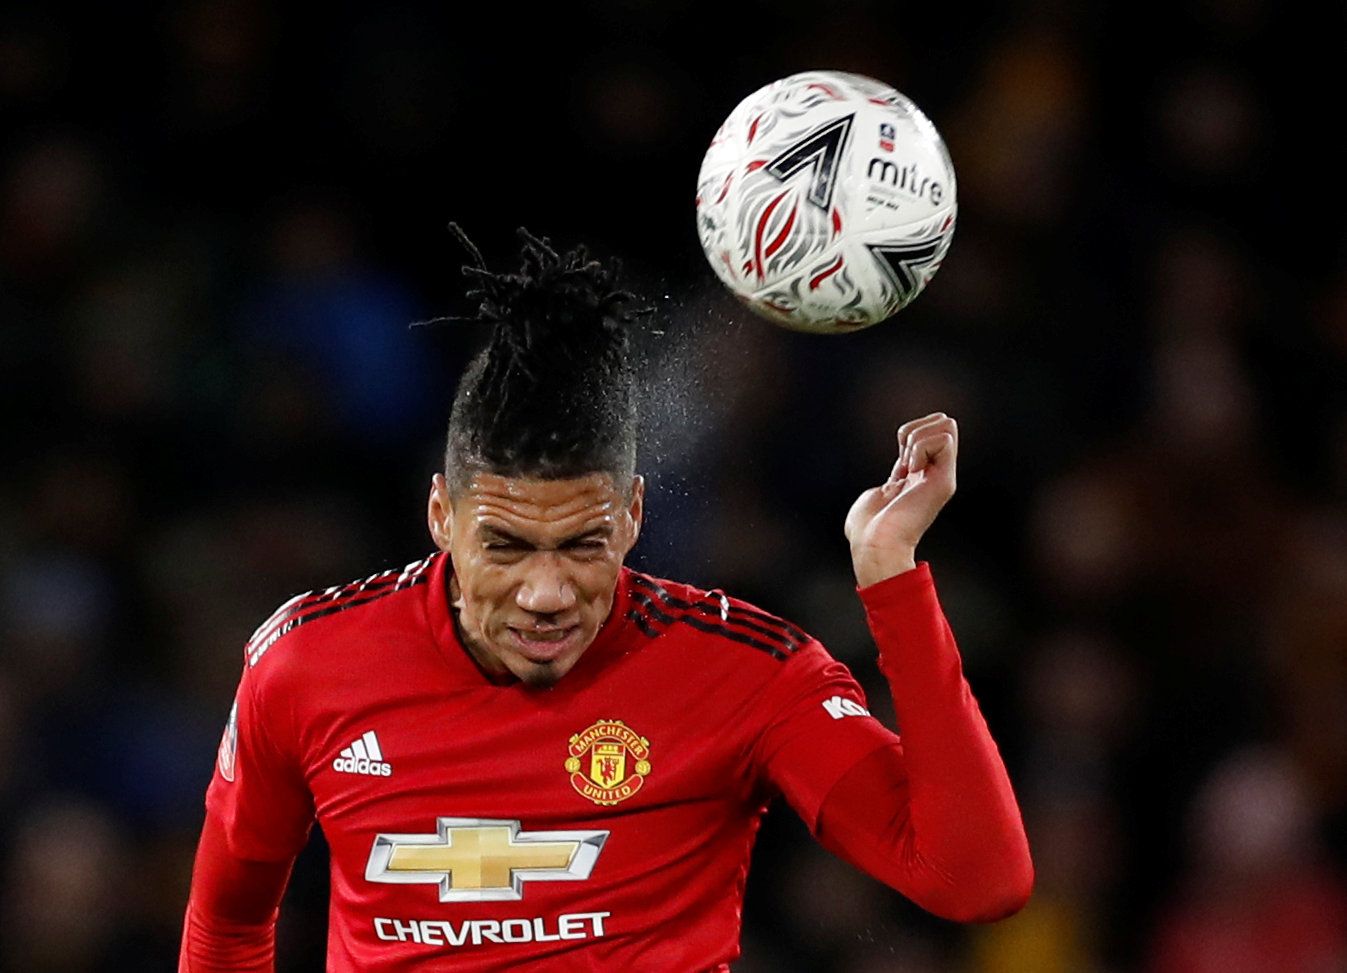 Soccer Football - FA Cup Quarter Final - Wolverhampton Wanderers v Manchester United - Molineux Stadium, Wolverhampton, Britain - March 16, 2019   Manchester United's Chris Smalling heads the ball    Action Images via Reuters/Carl Recine